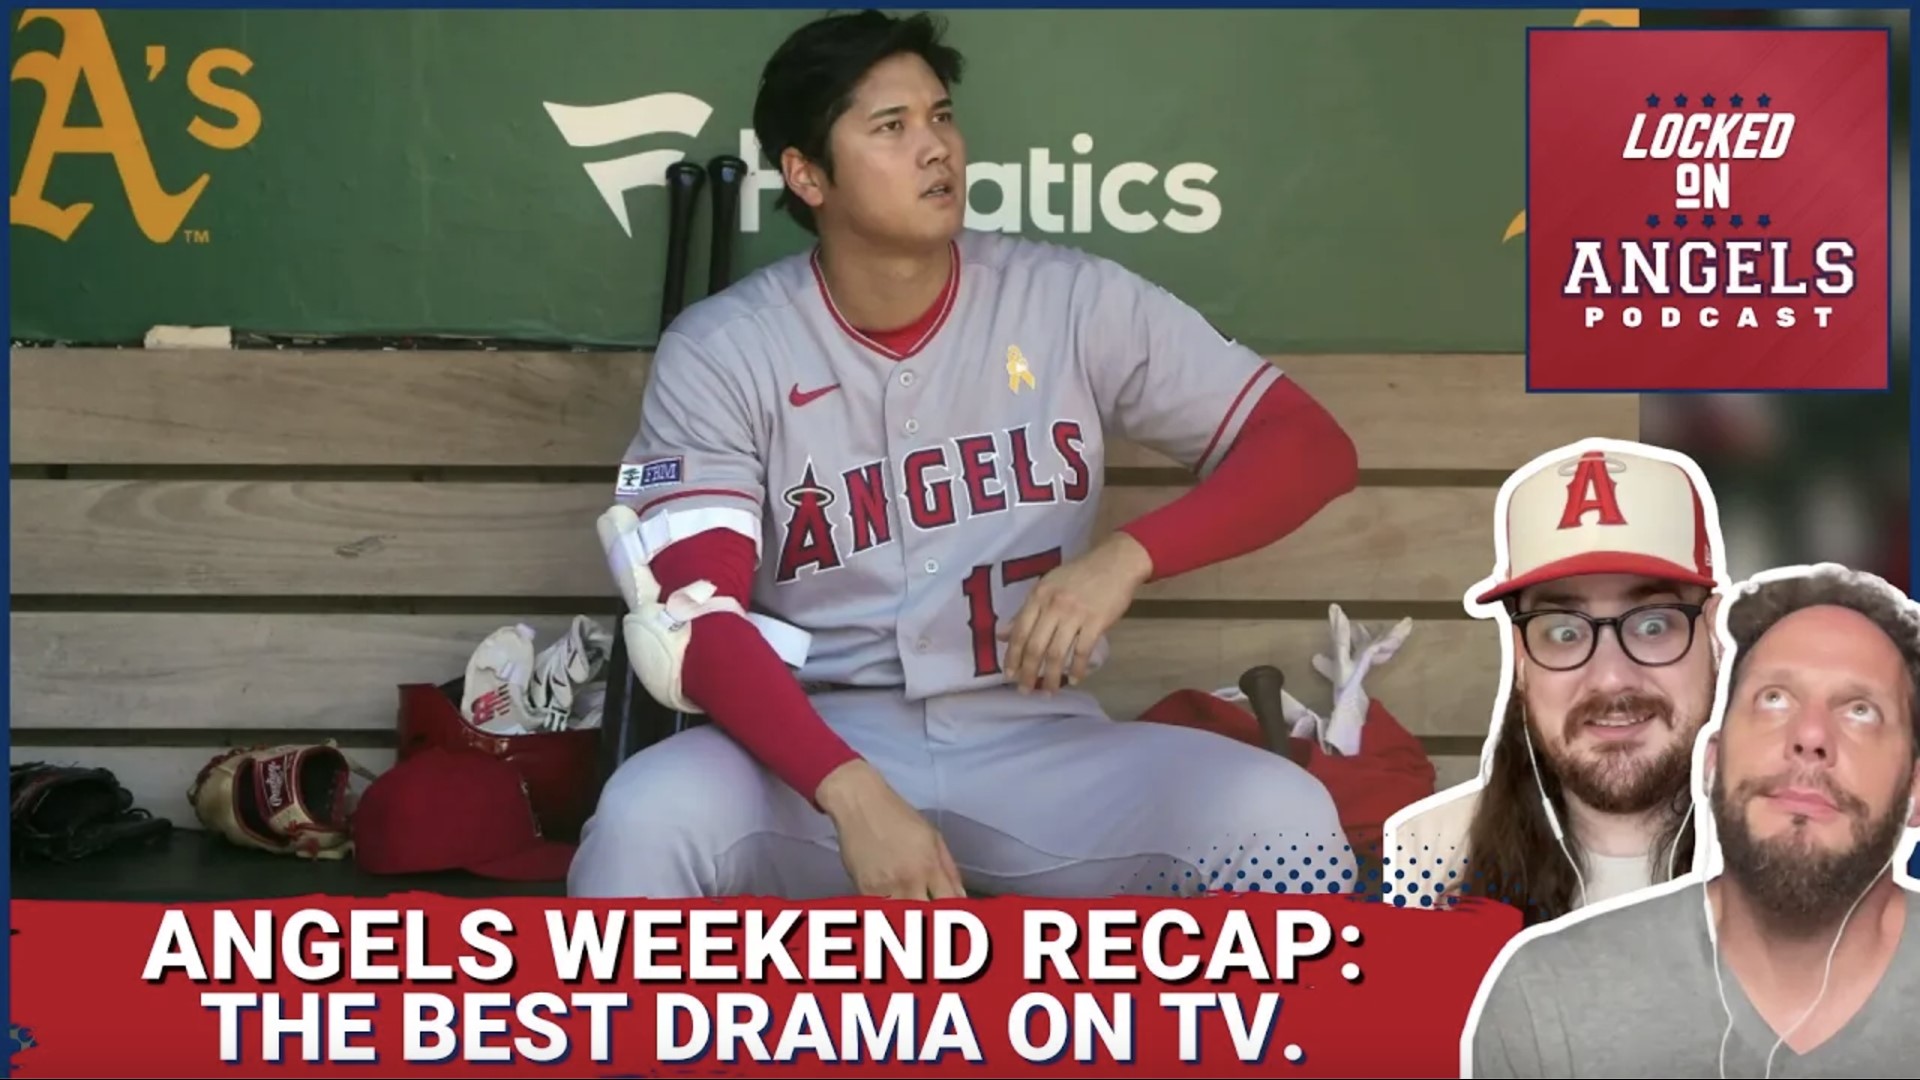 The Los Angeles Angels seem to have more action off the field than they do on, as this weekend was full of medical drama